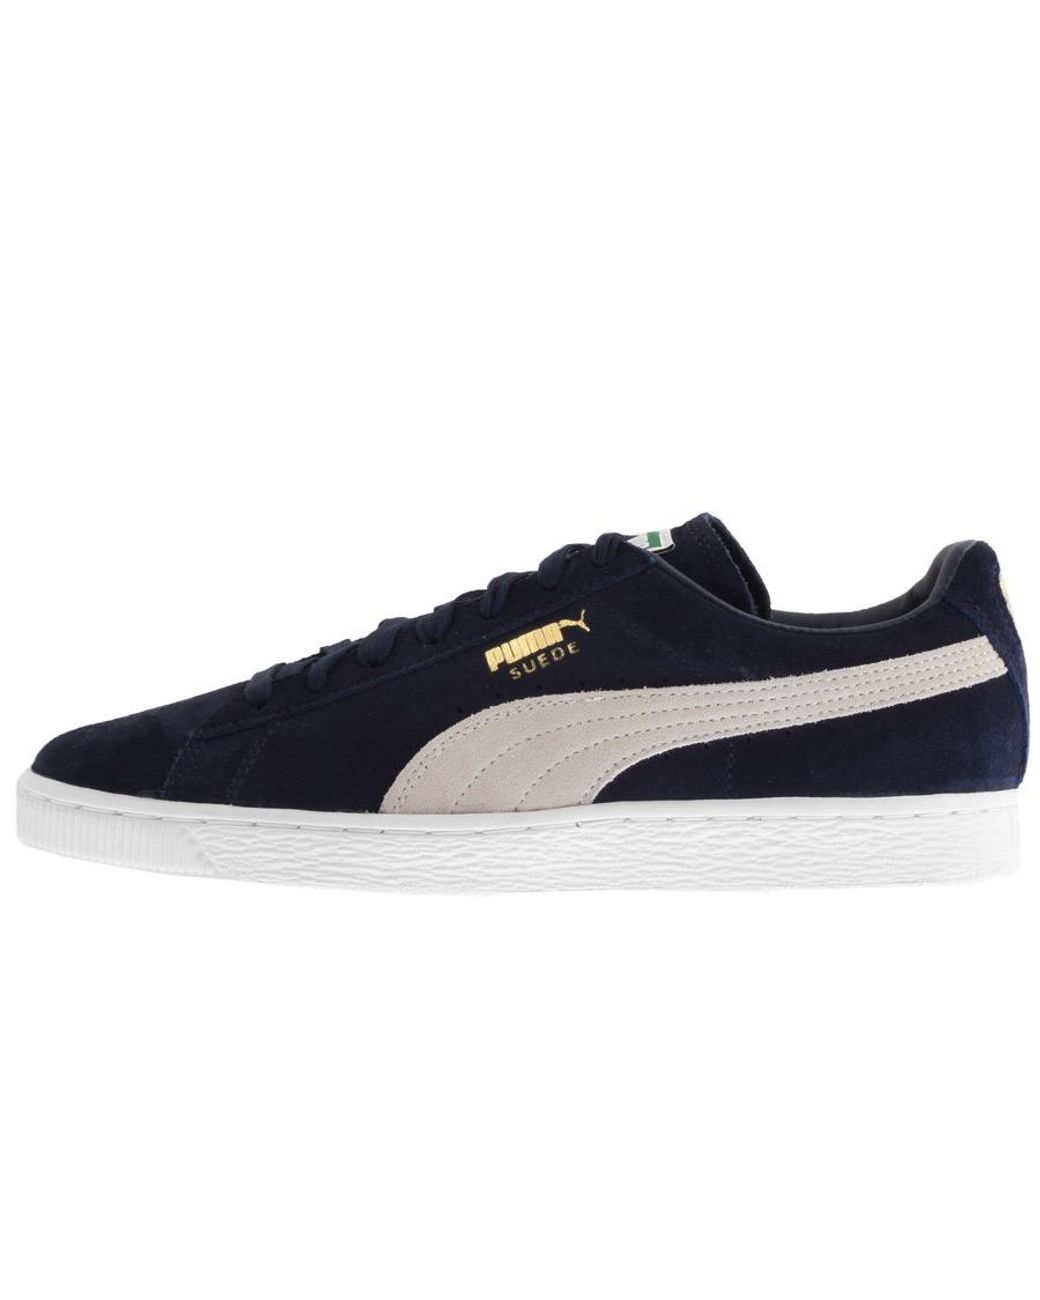 PUMA Suede Classic in Blue for Men - Save 59% - Lyst